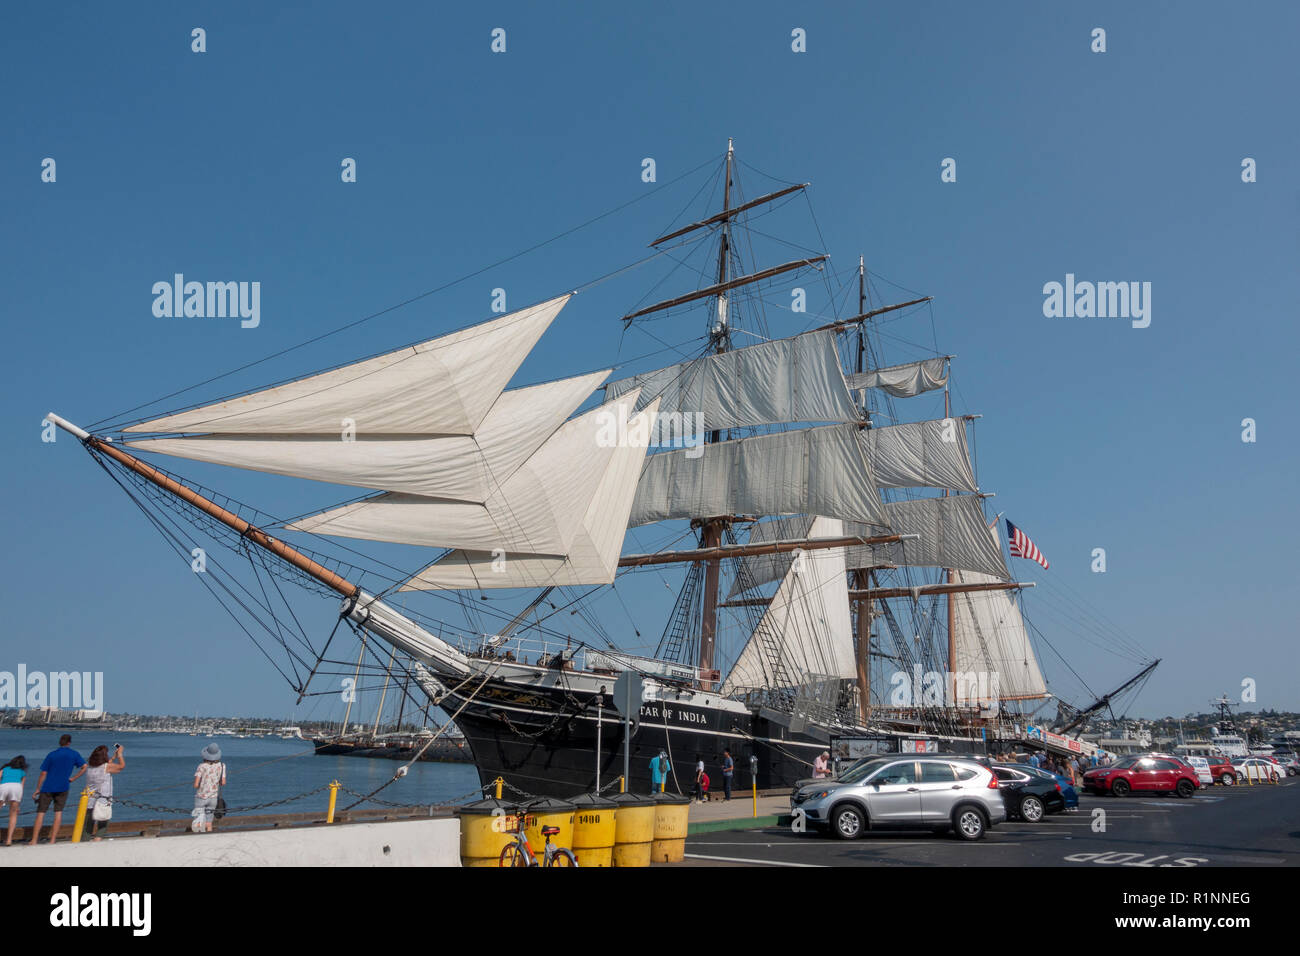 The Star of India (previously called the Euterpe), Maritime Museum of San Diego Bay, San Diego, California, United States. Stock Photo